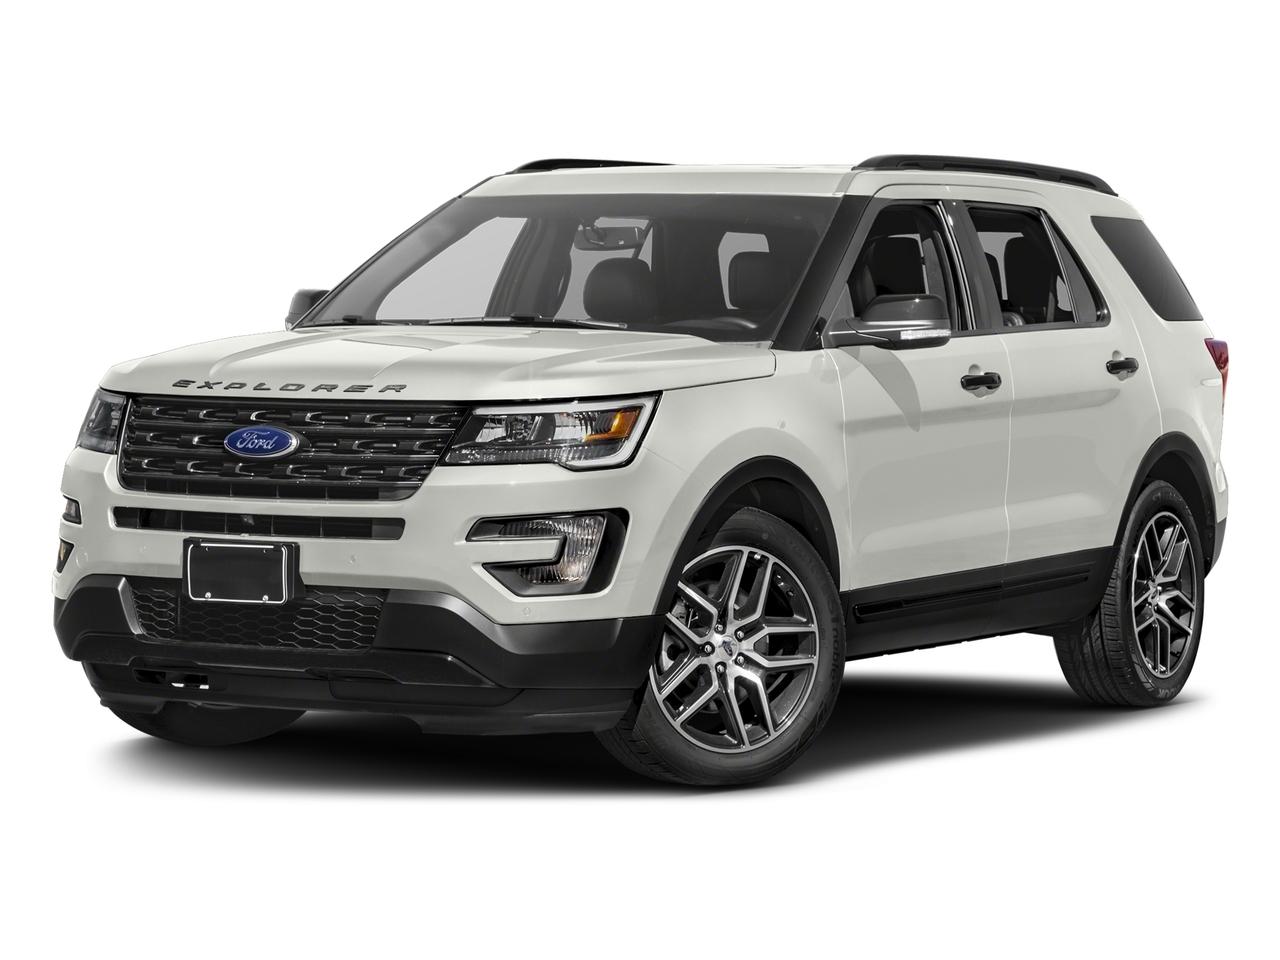 2016 Ford Explorer Vehicle Photo in Pilot Point, TX 76258-6053